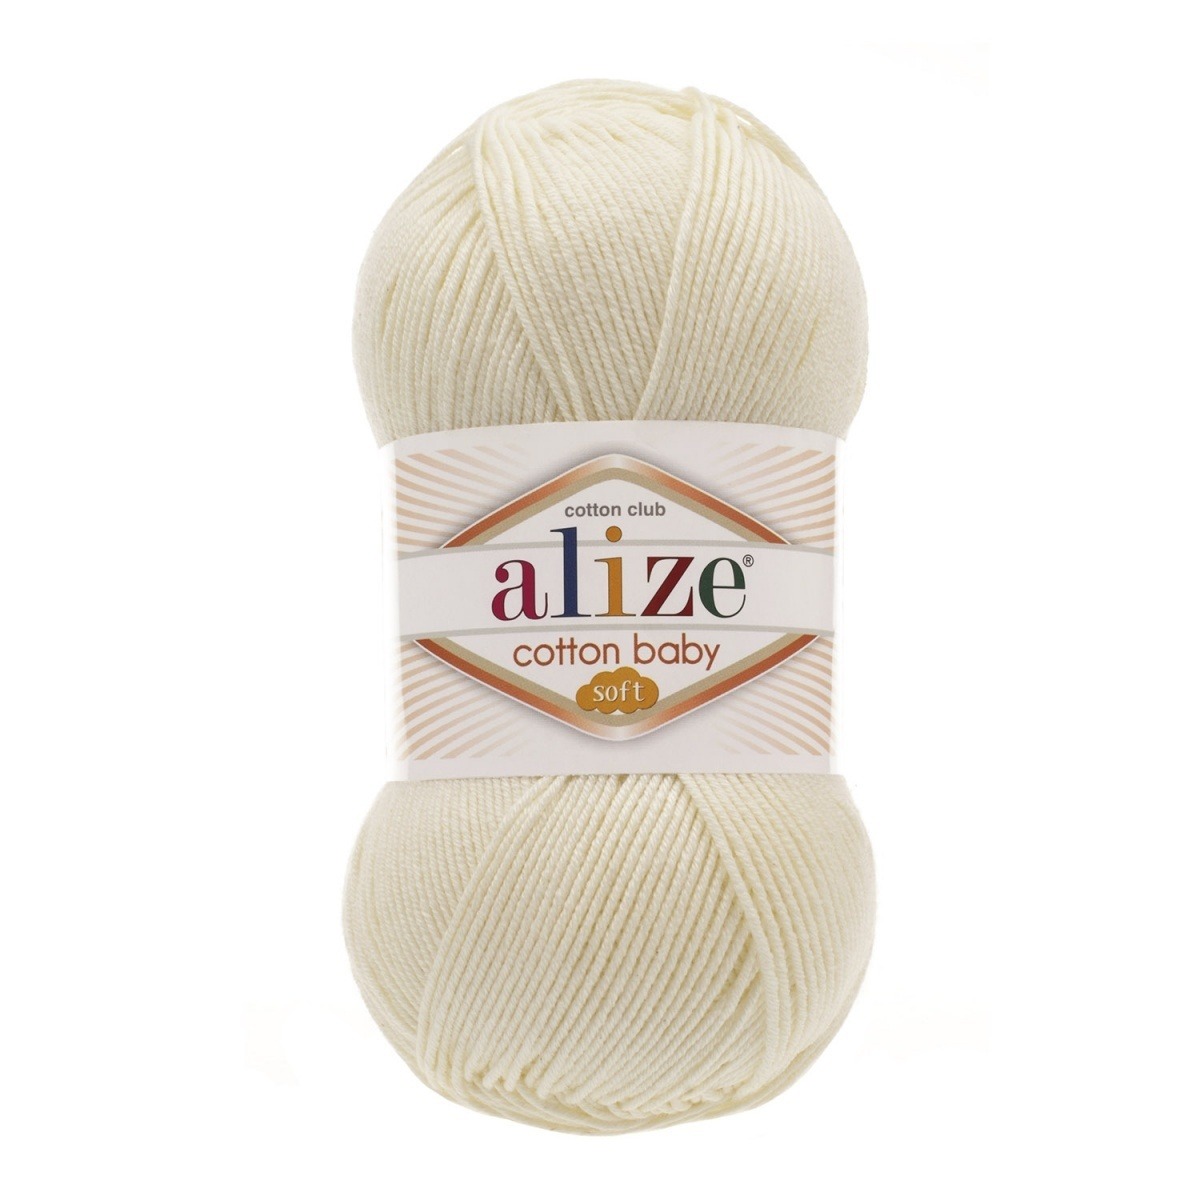 Alize "Cotton baby soft" (62)